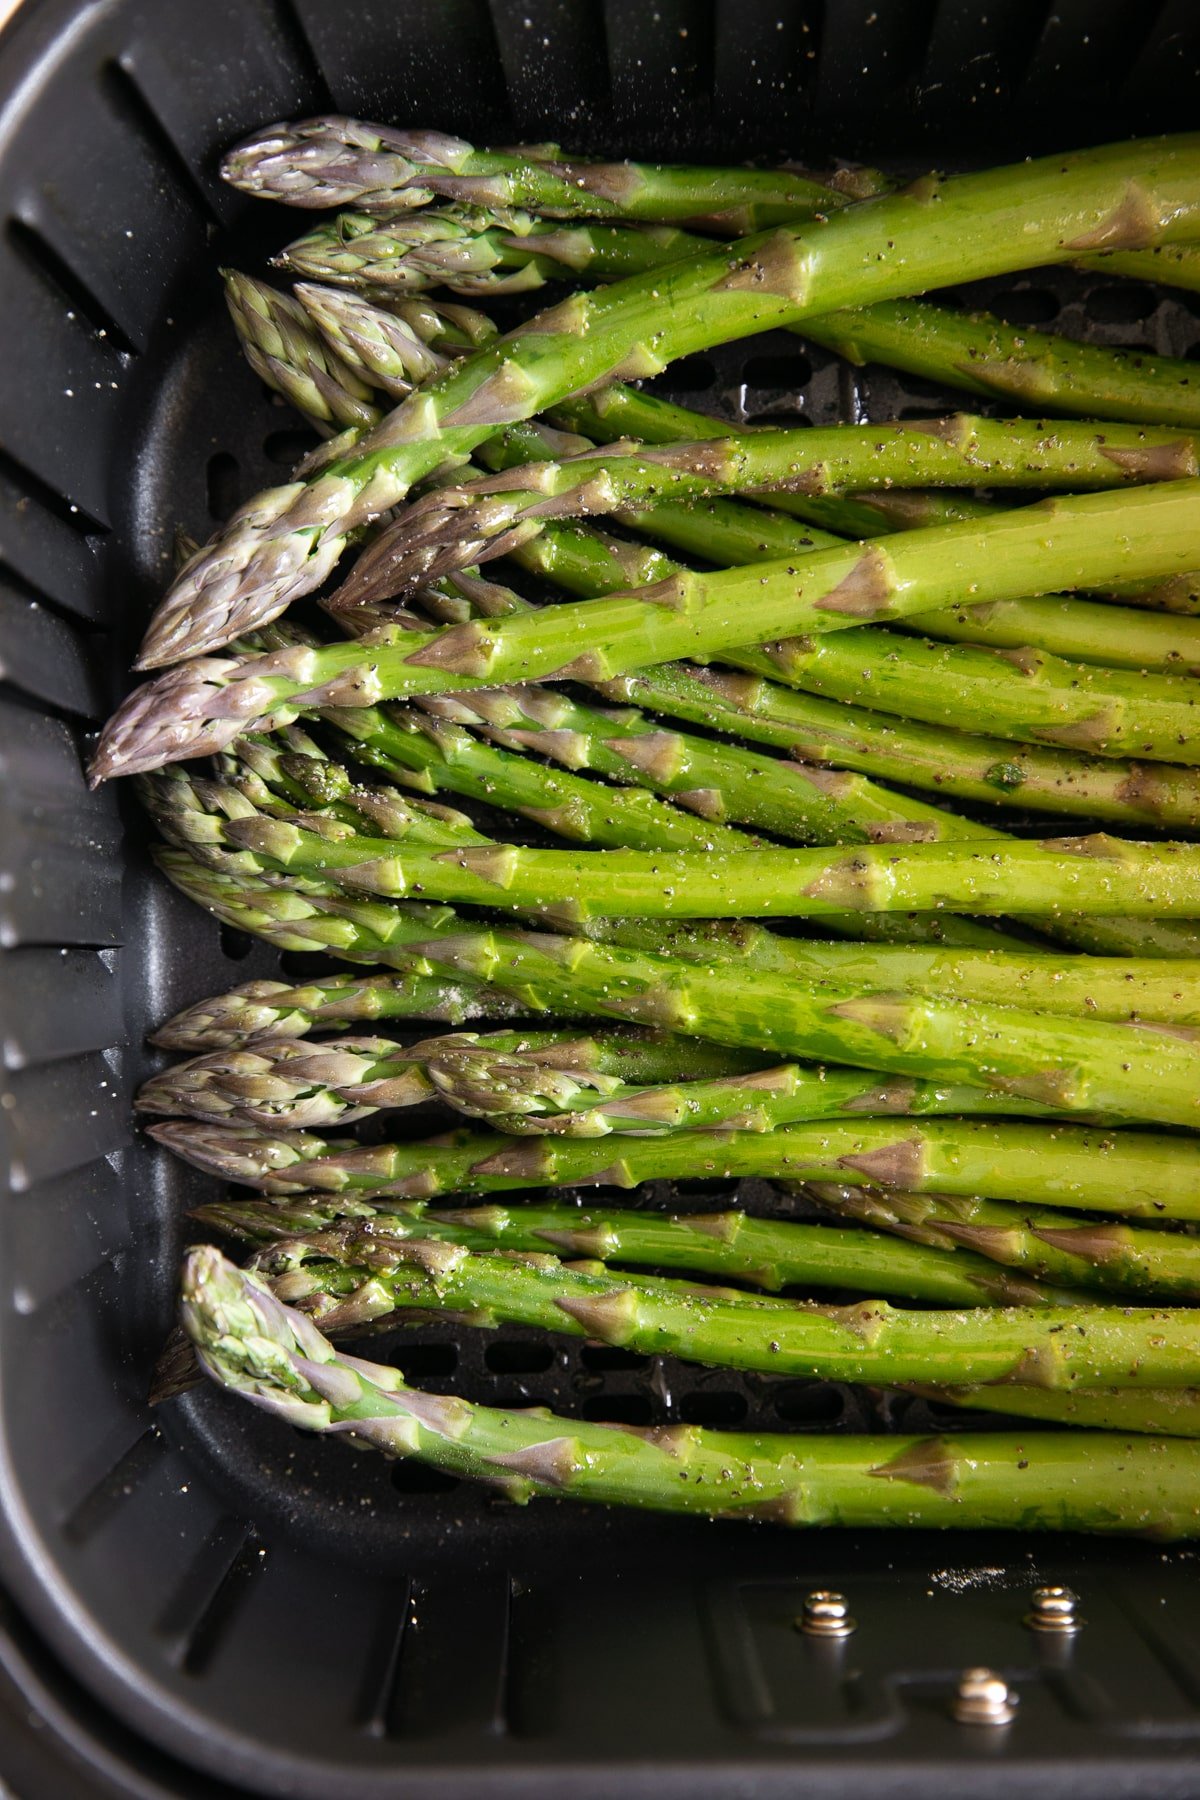 Air fryer basket filled with uncooked asparagus.